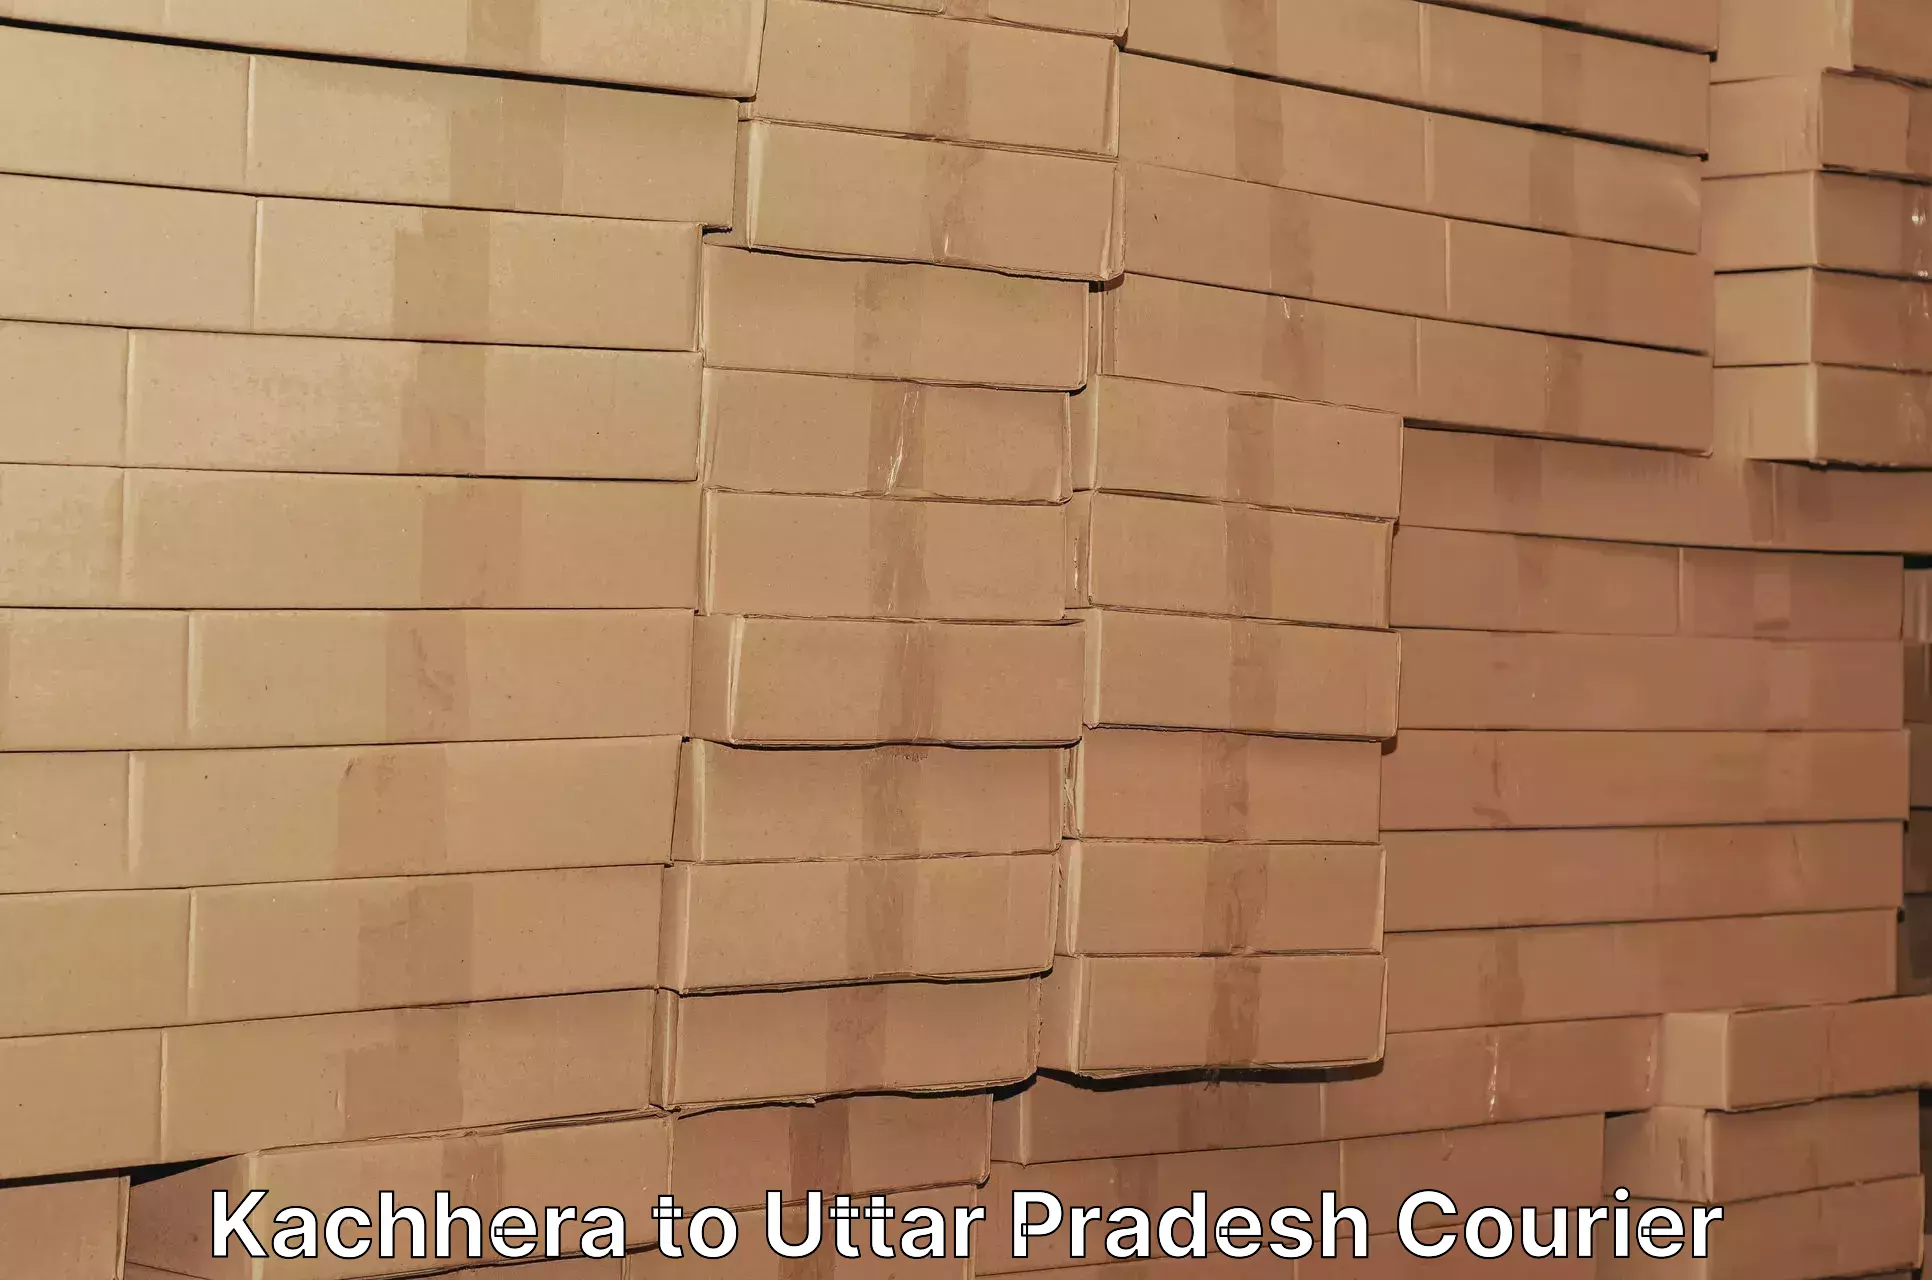 Fastest parcel delivery in Kachhera to Budhana